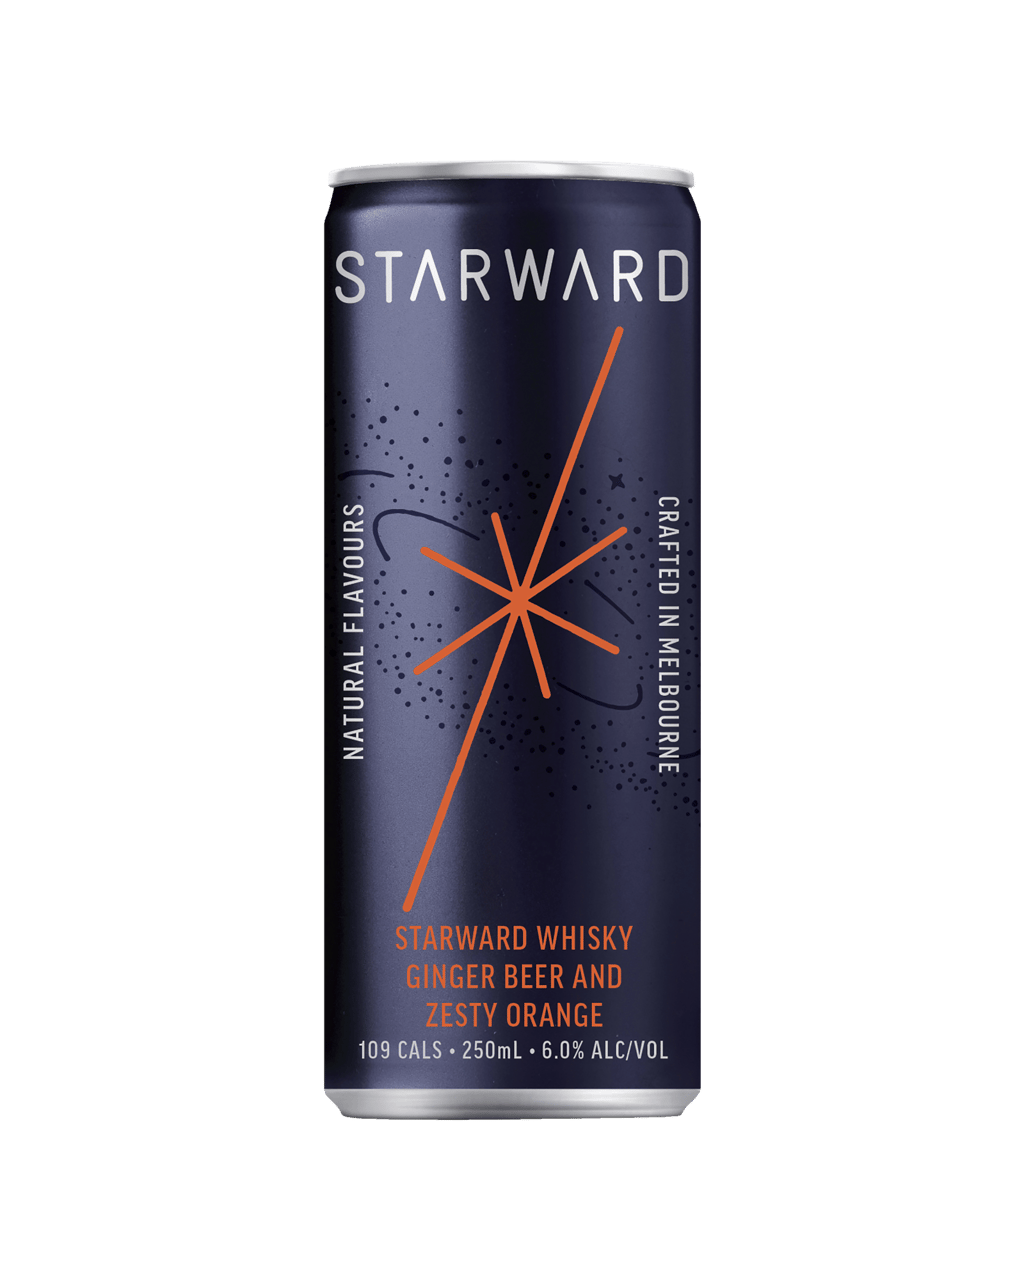 Starward Whisky, Ginger Beer, and Zesty Orange 250ml can 4-Pack